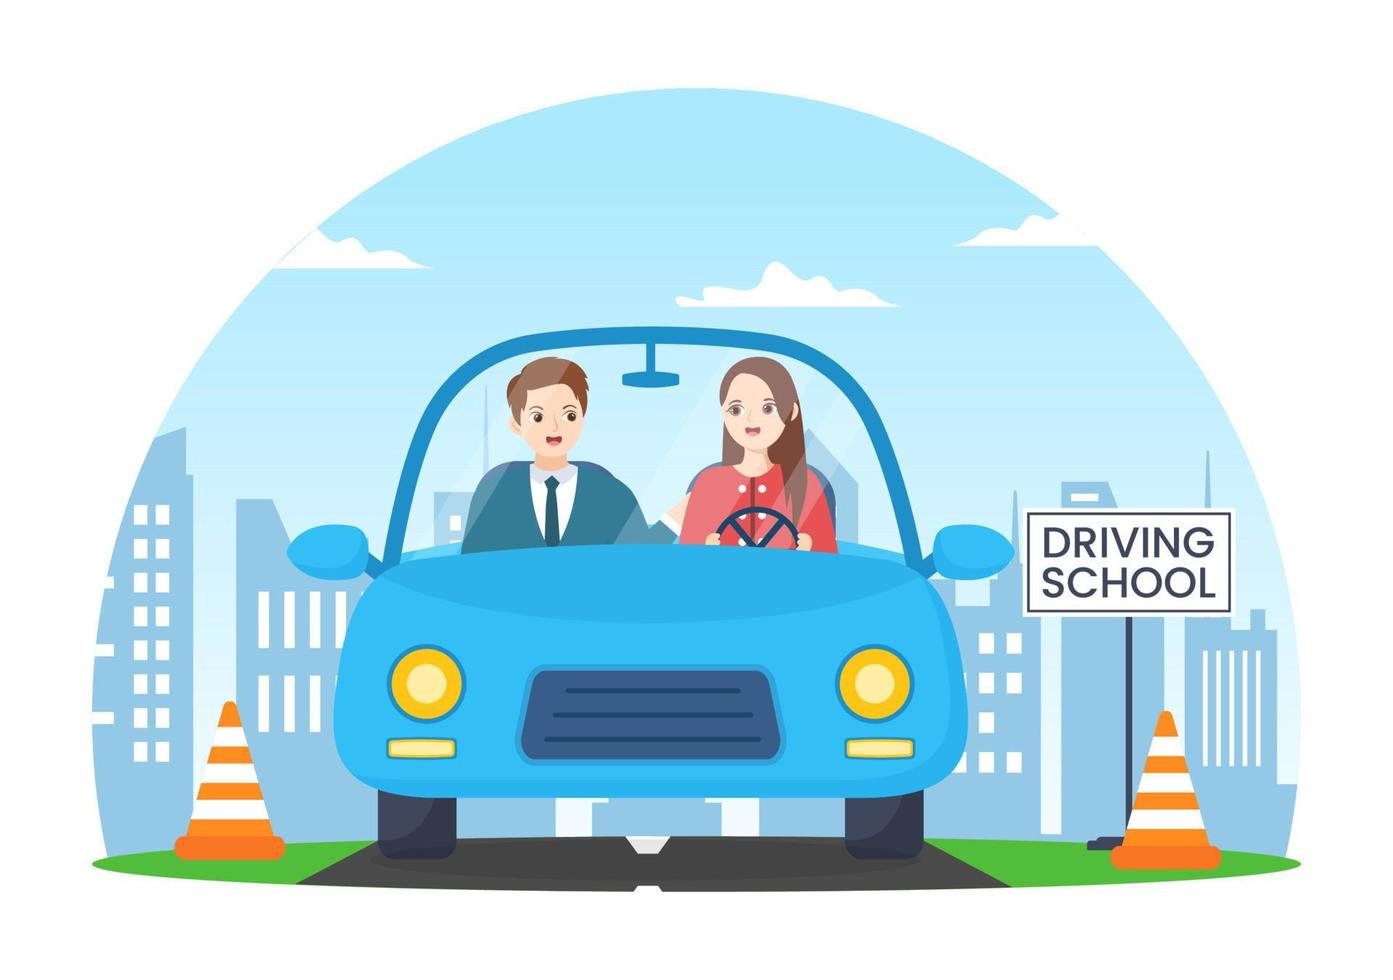 Driving School with Education Process of Car Training and Learning to Drive to Get Drivers License in Flat Cartoon Hand Drawn Templates Illustration vector